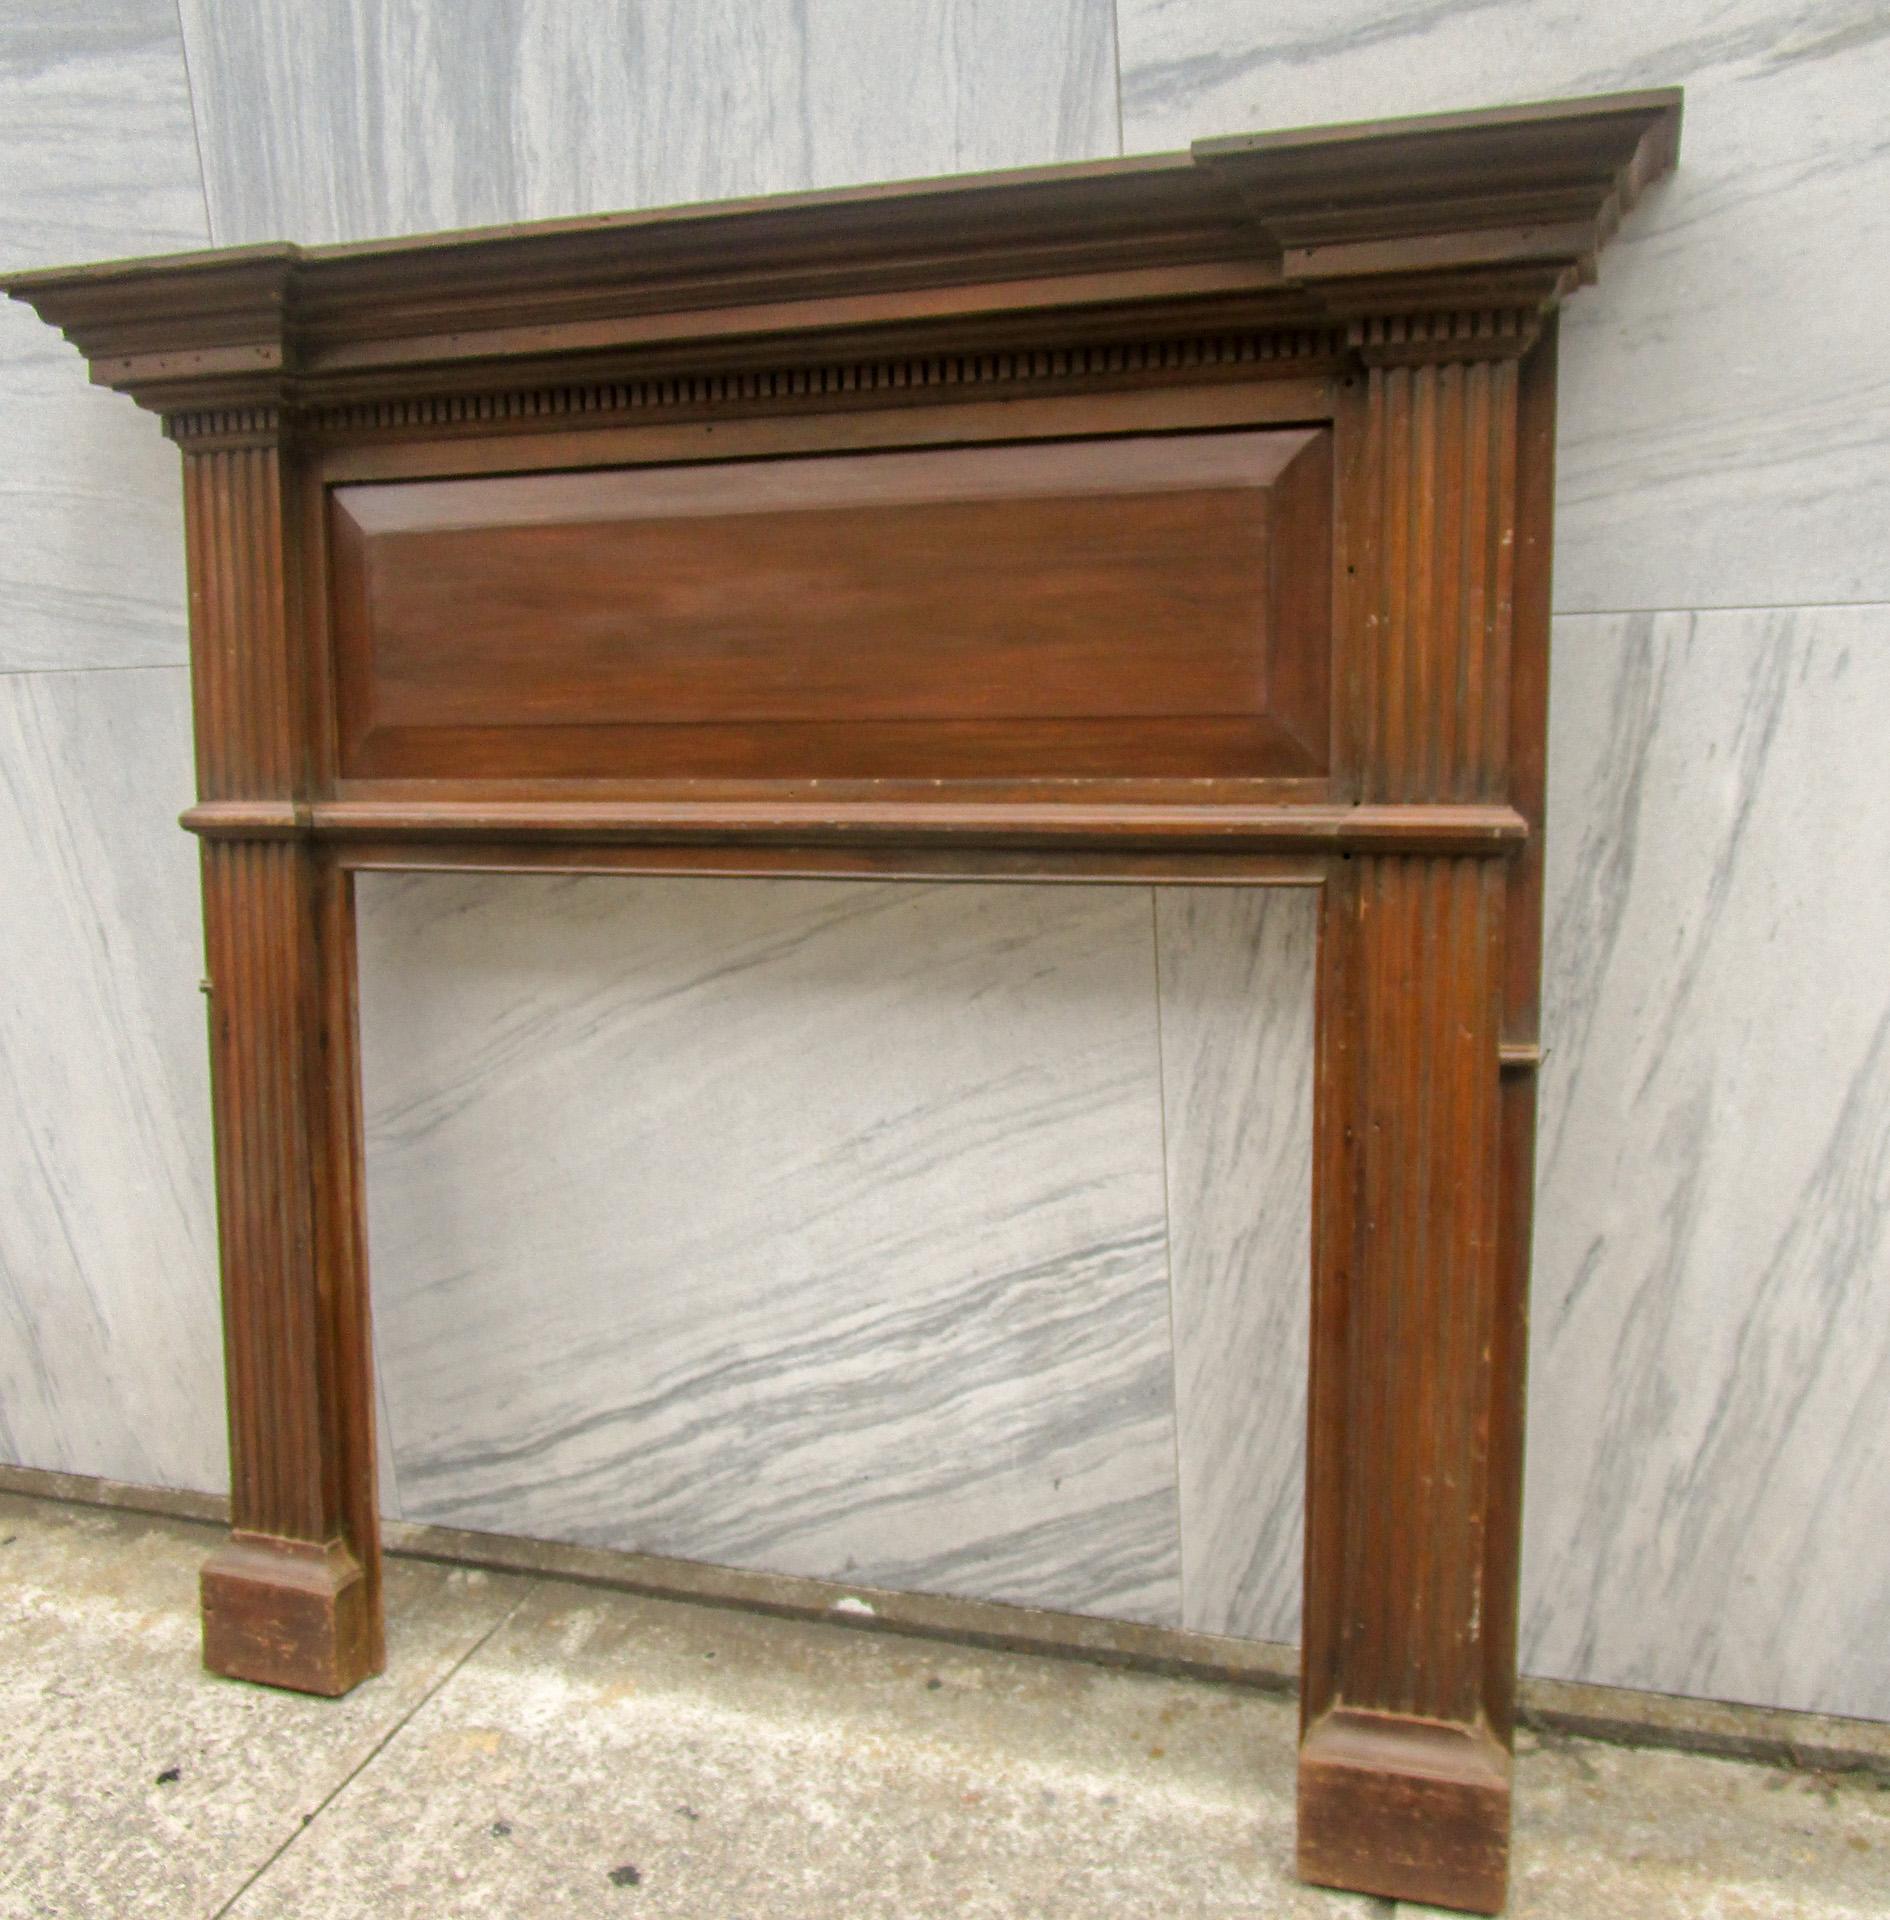 Large size wooden fireplace mantel from 